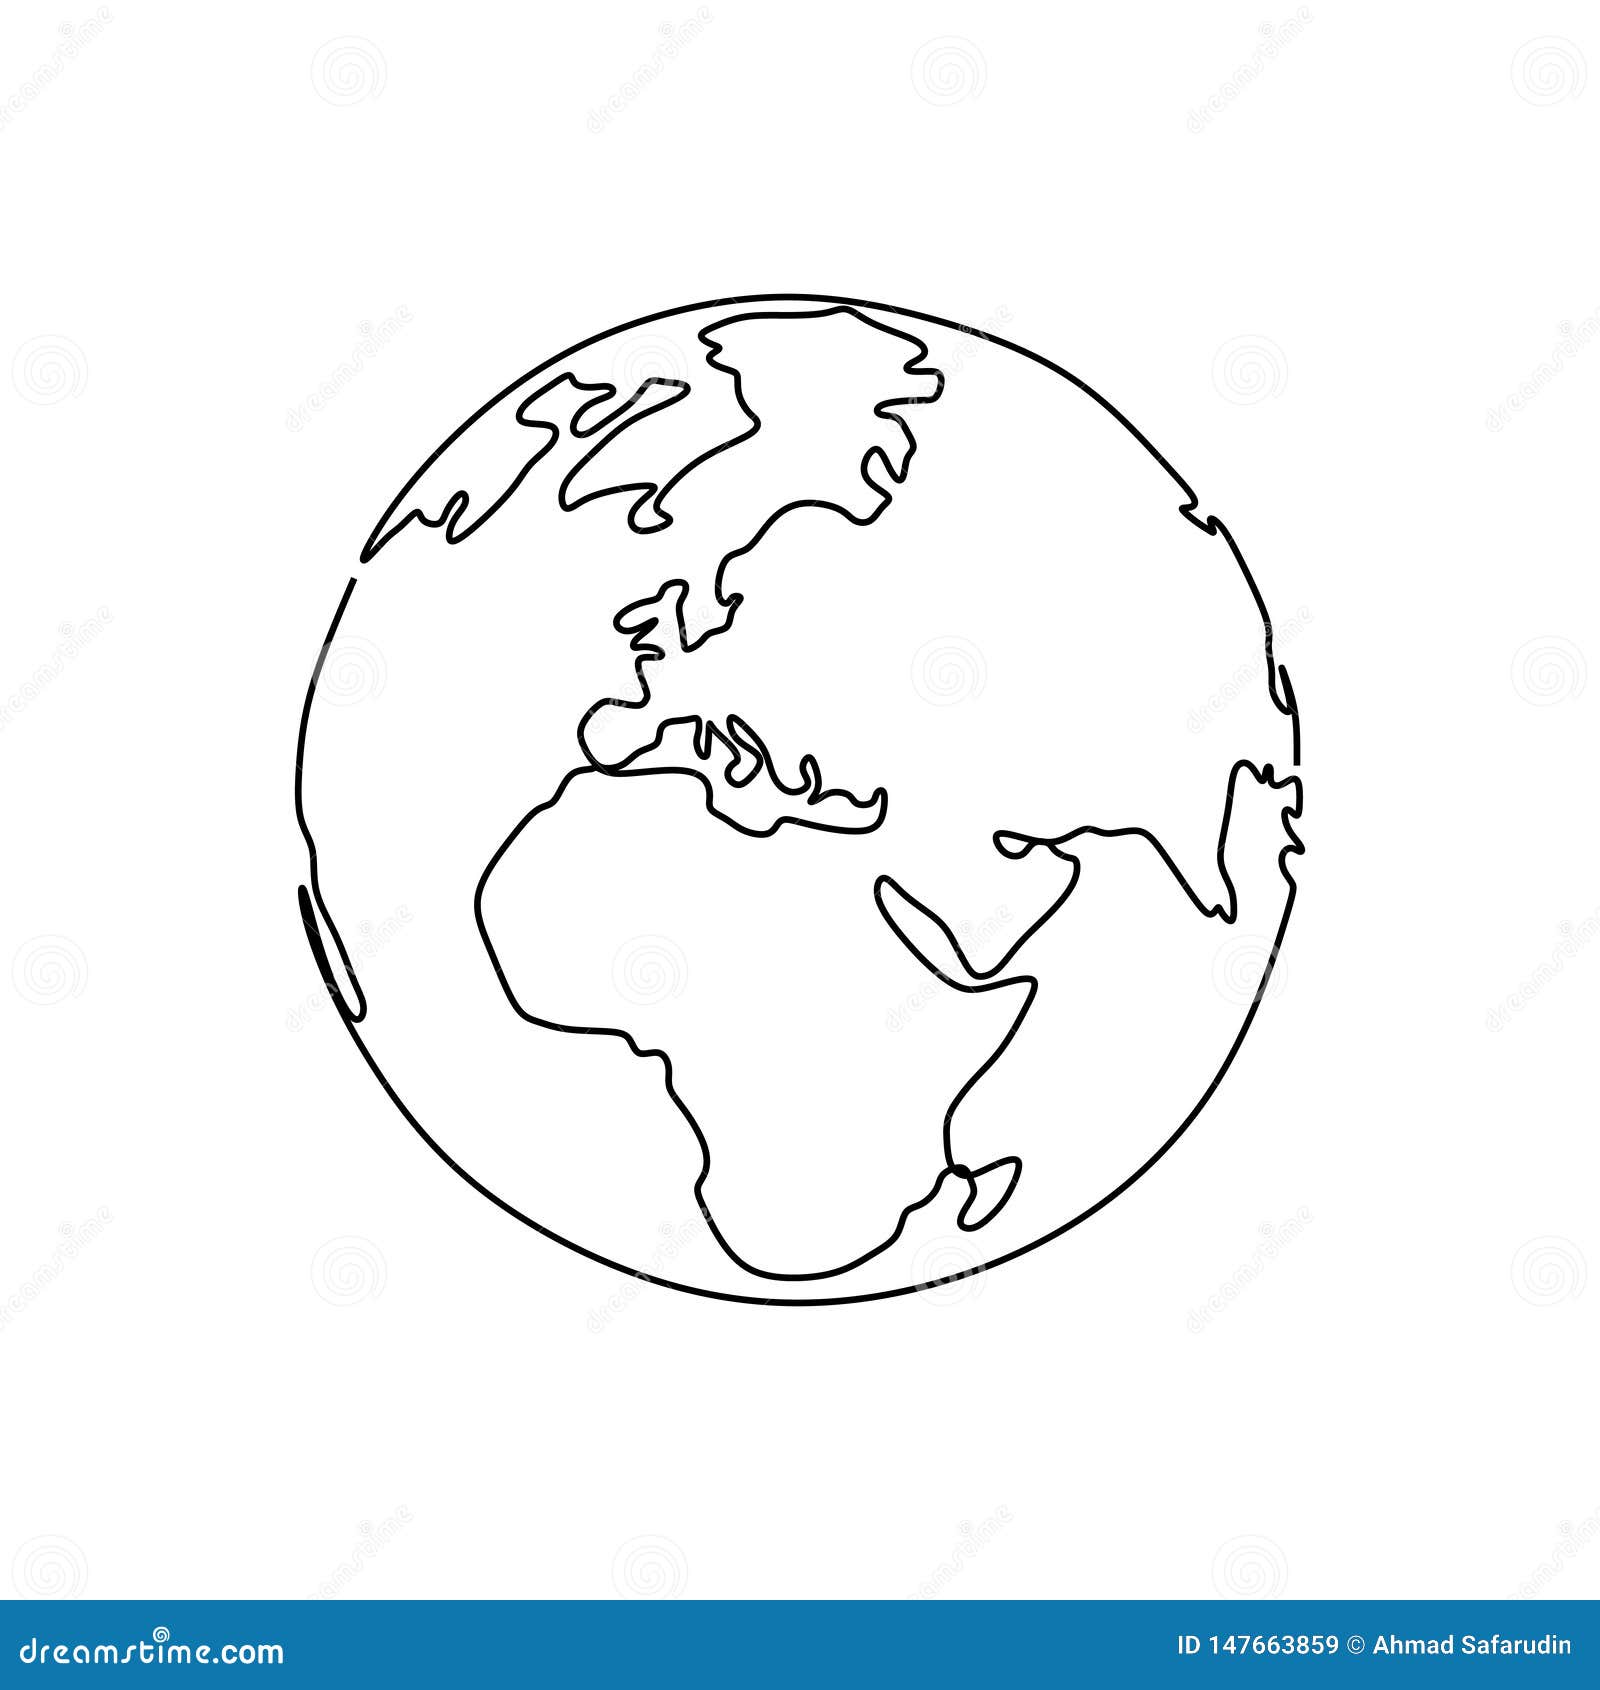 One Line Drawing Of Earth Minimalist Design Stock Vector 